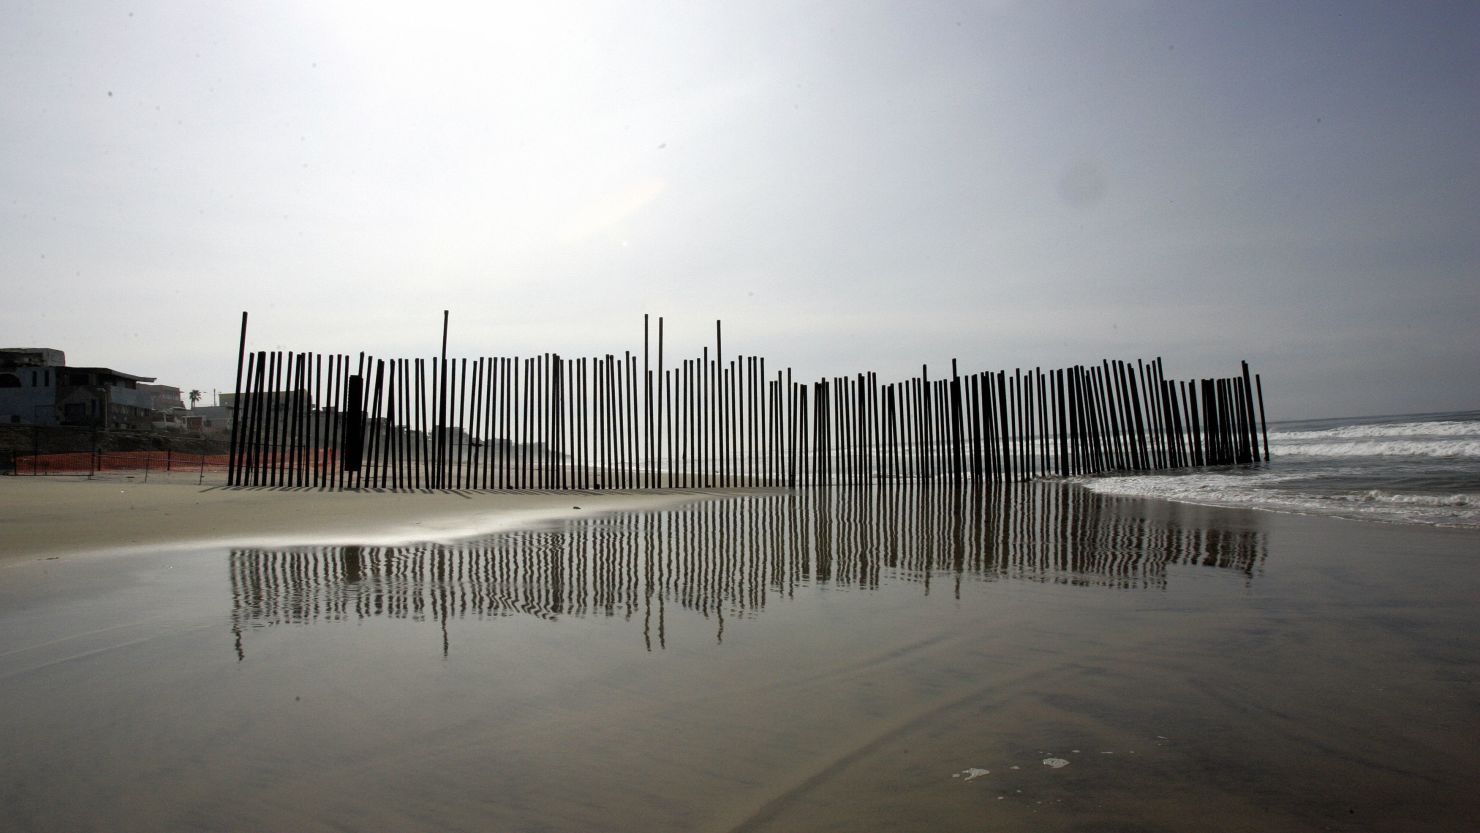 A section of the wall at the U.S.-Mexico border at Imperial Beach, California.